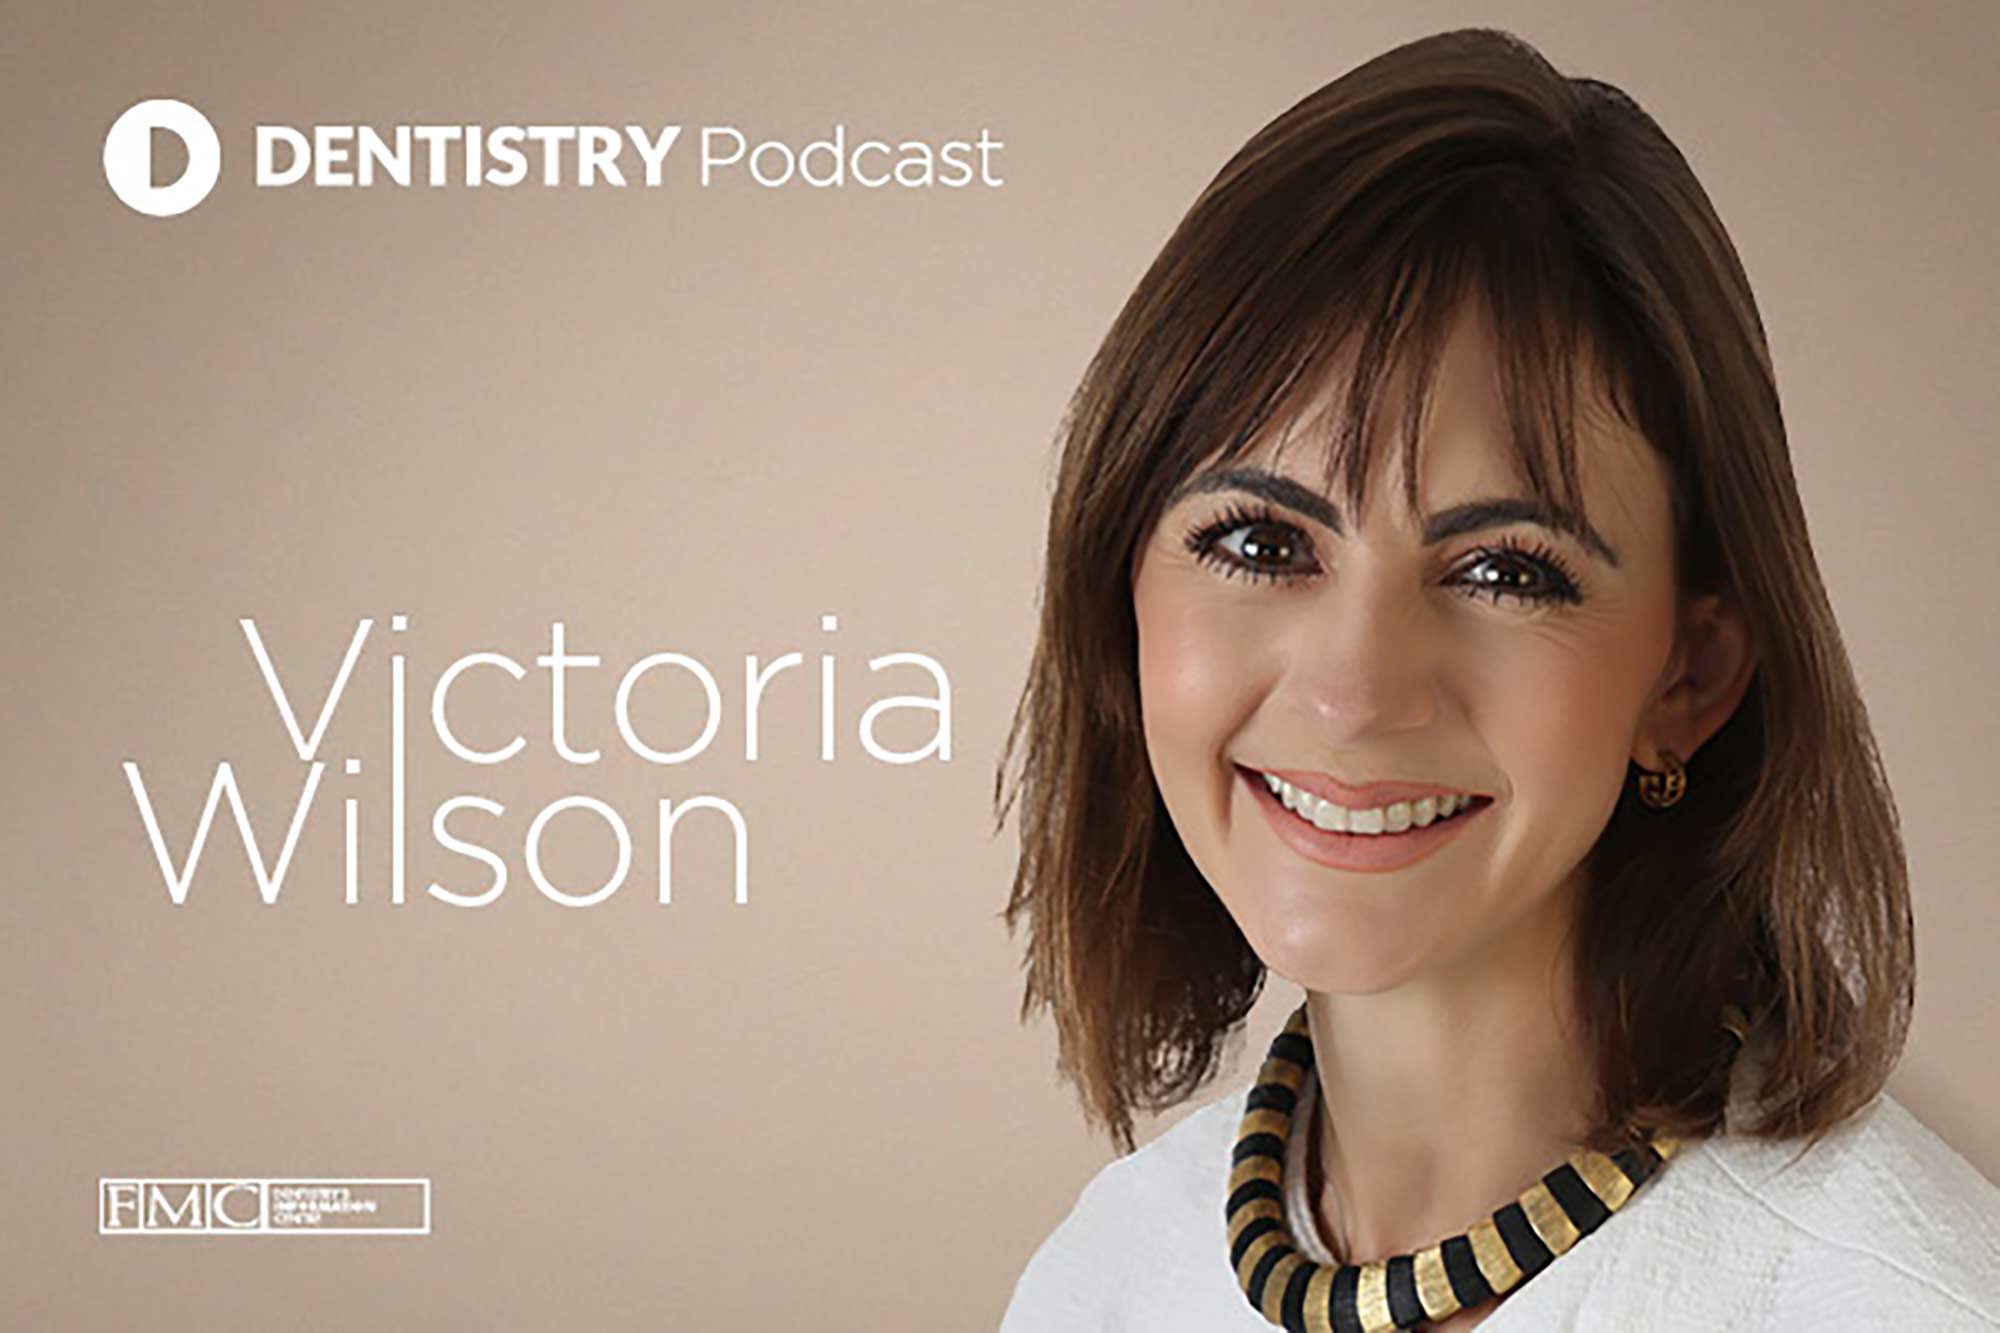 In our latest podcast, Dentistry Online talks to Victoria Wilson about her oral health project and the positives dental professionals can take away from the pandemic